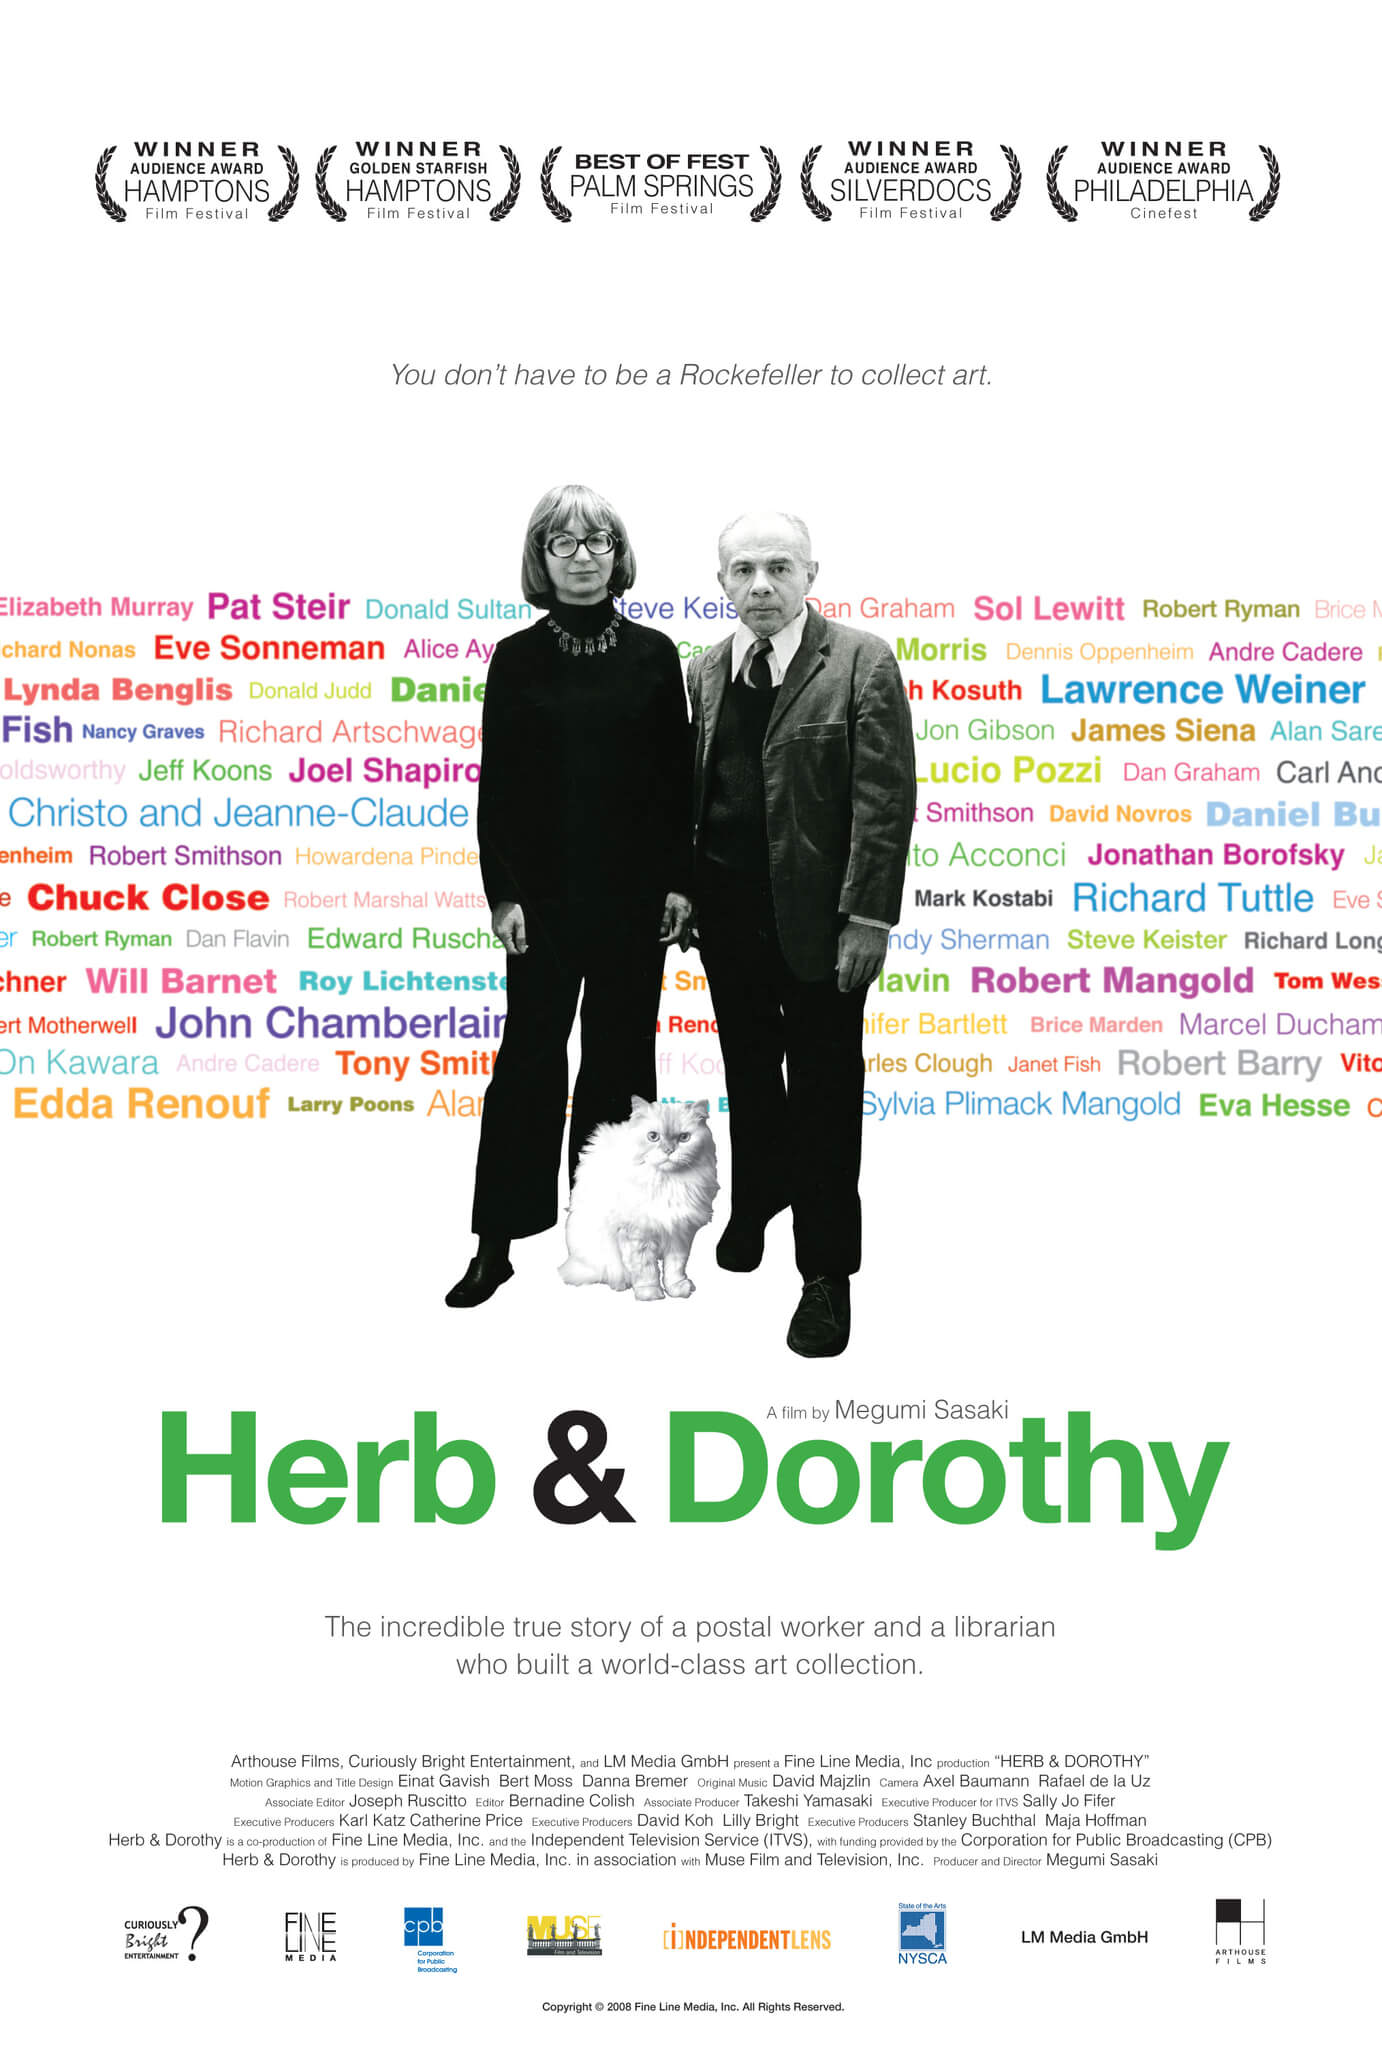 Poster for Herb & Dorothy, a film by Megumi Sasaki, and produced by Arthouse Films